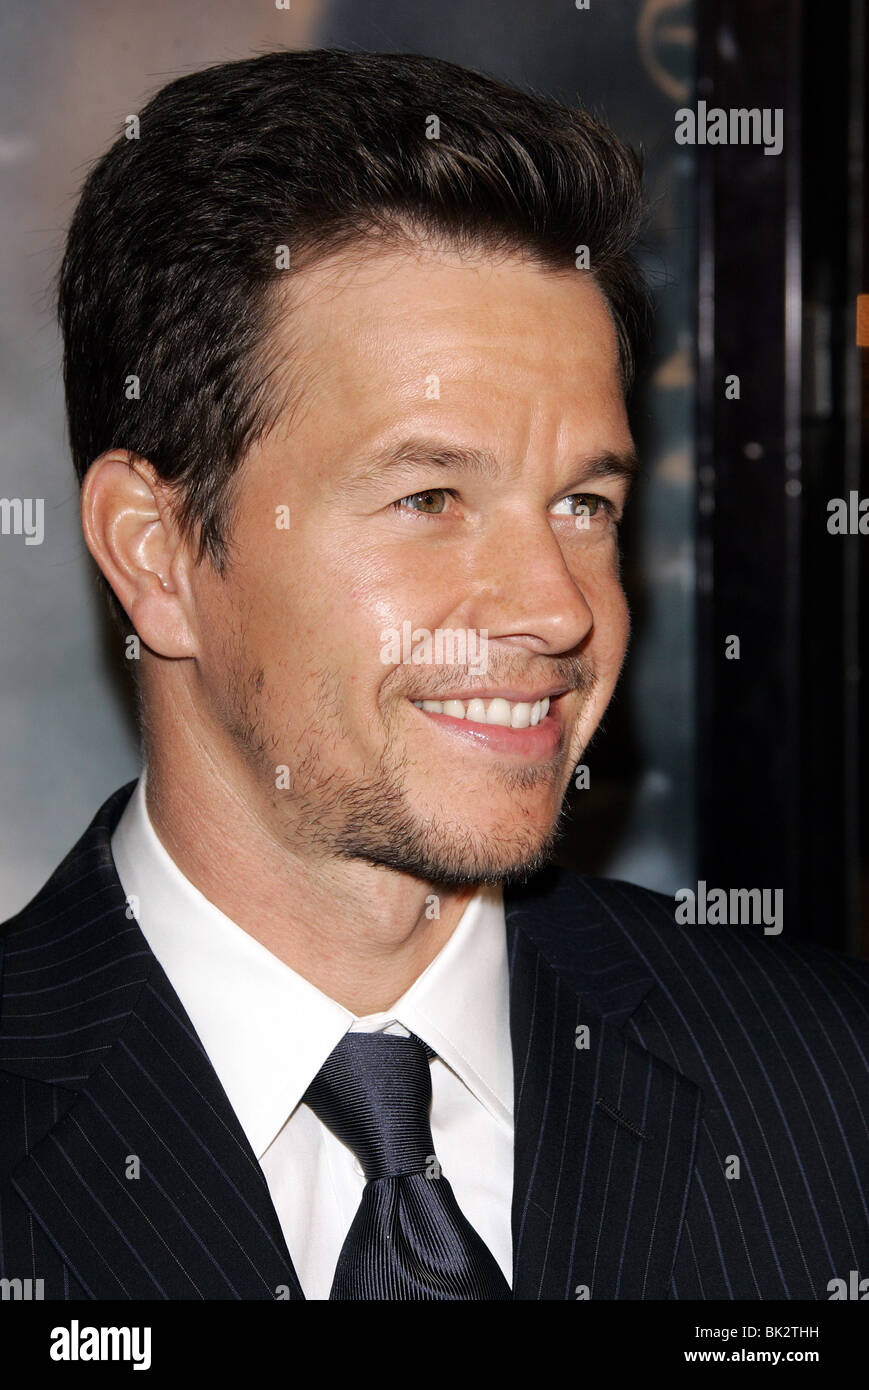 MARK WAHLBERG SHOOTER PREMIERE LOS ANGELES WESTWOOD LOS ANGELES USA 08 Mars 2007 Banque D'Images